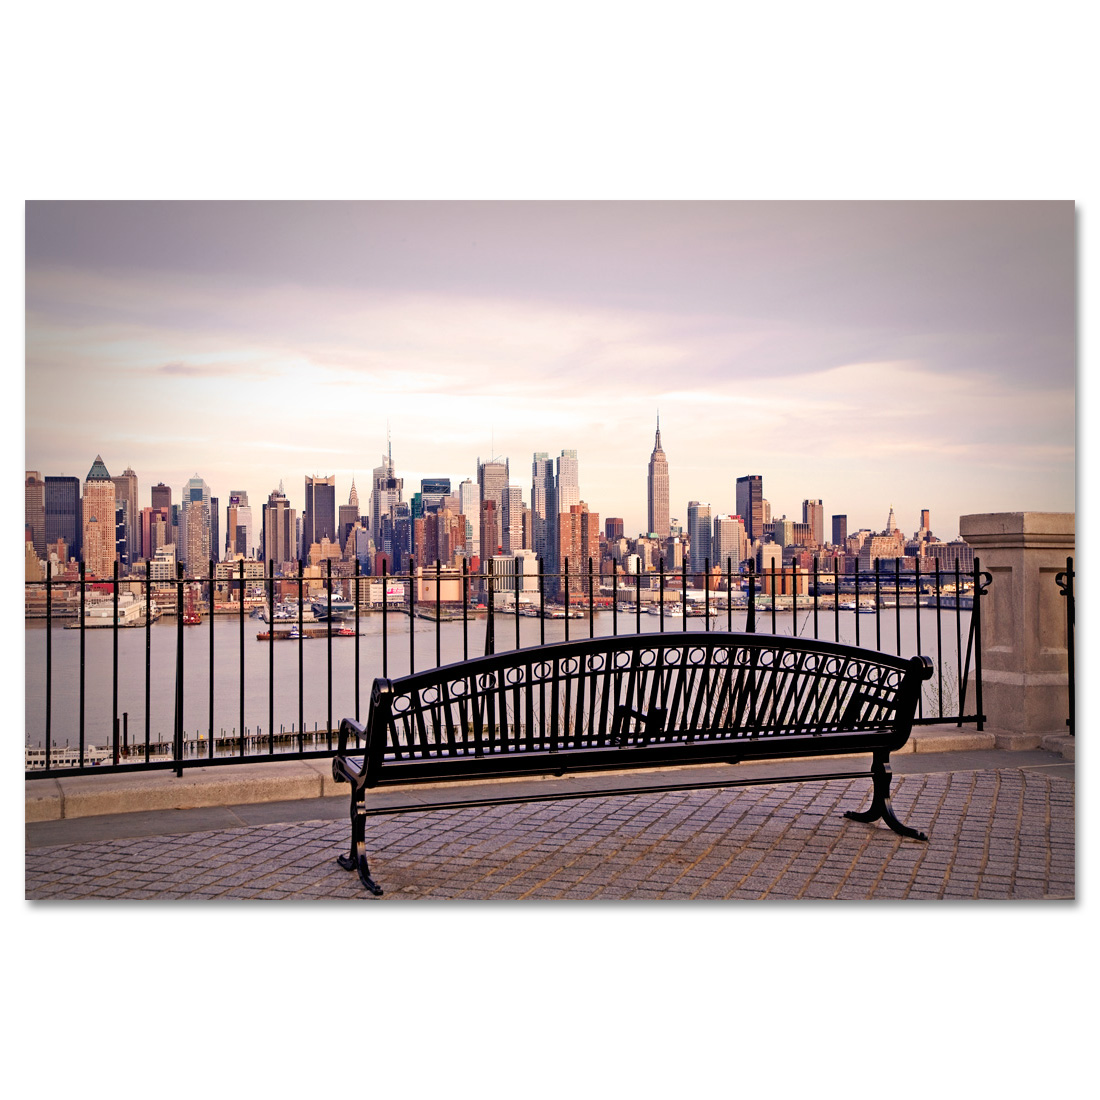 View Print Bench Manhattan New NY - Christmas Gifts at Midtown from York Art